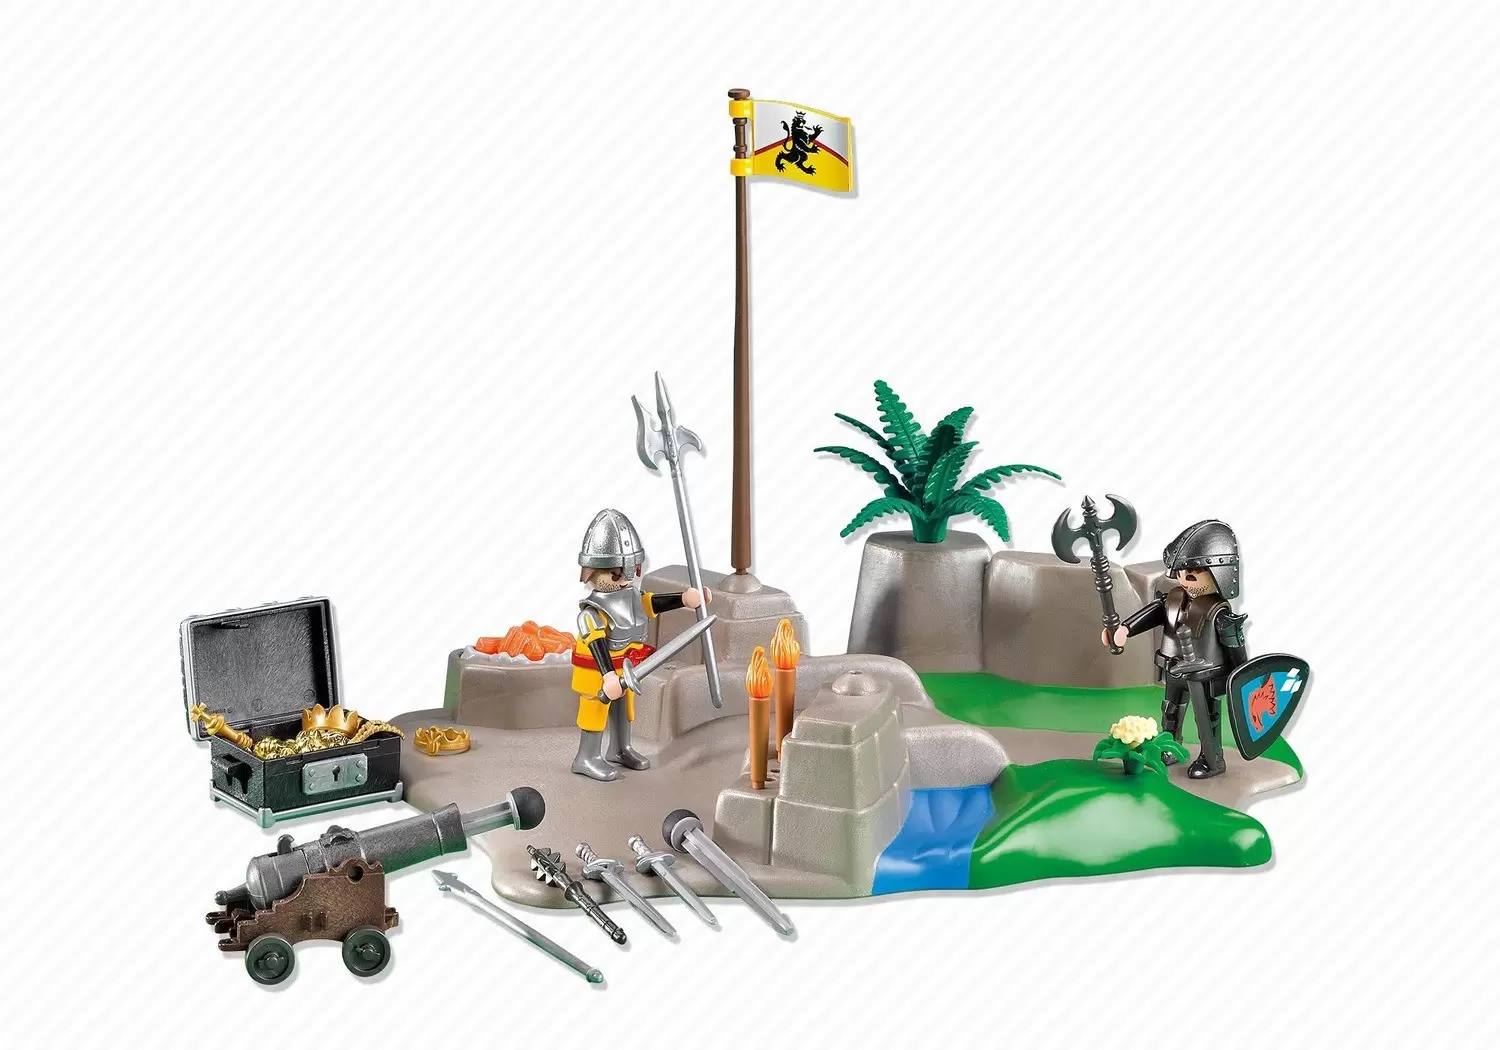 Playmobil Middle-Ages - Knight Scene